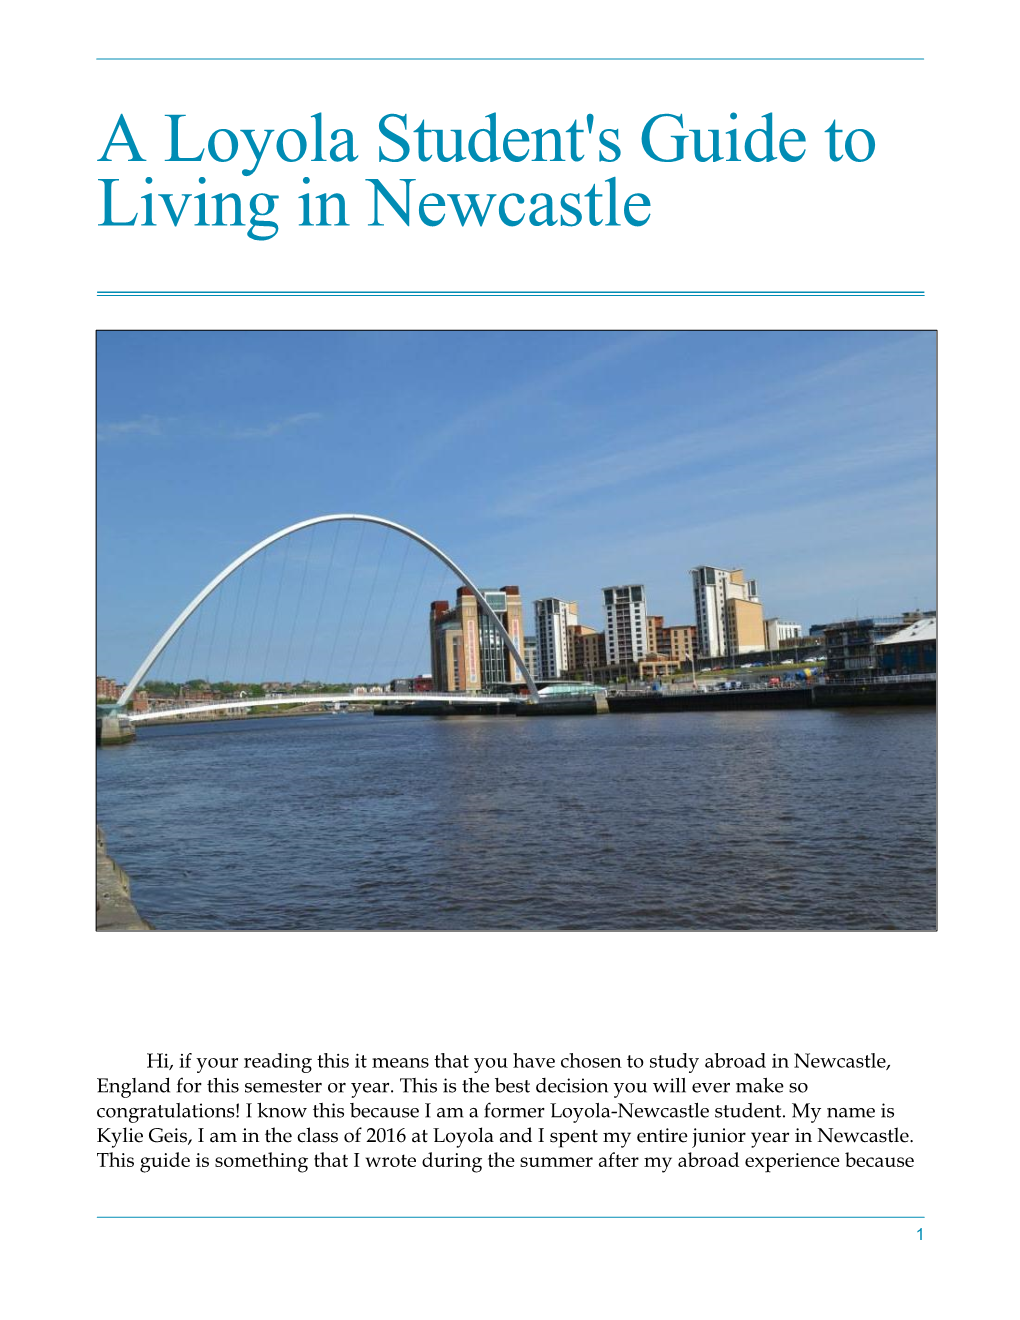 Student Guide to Living in Newcastle